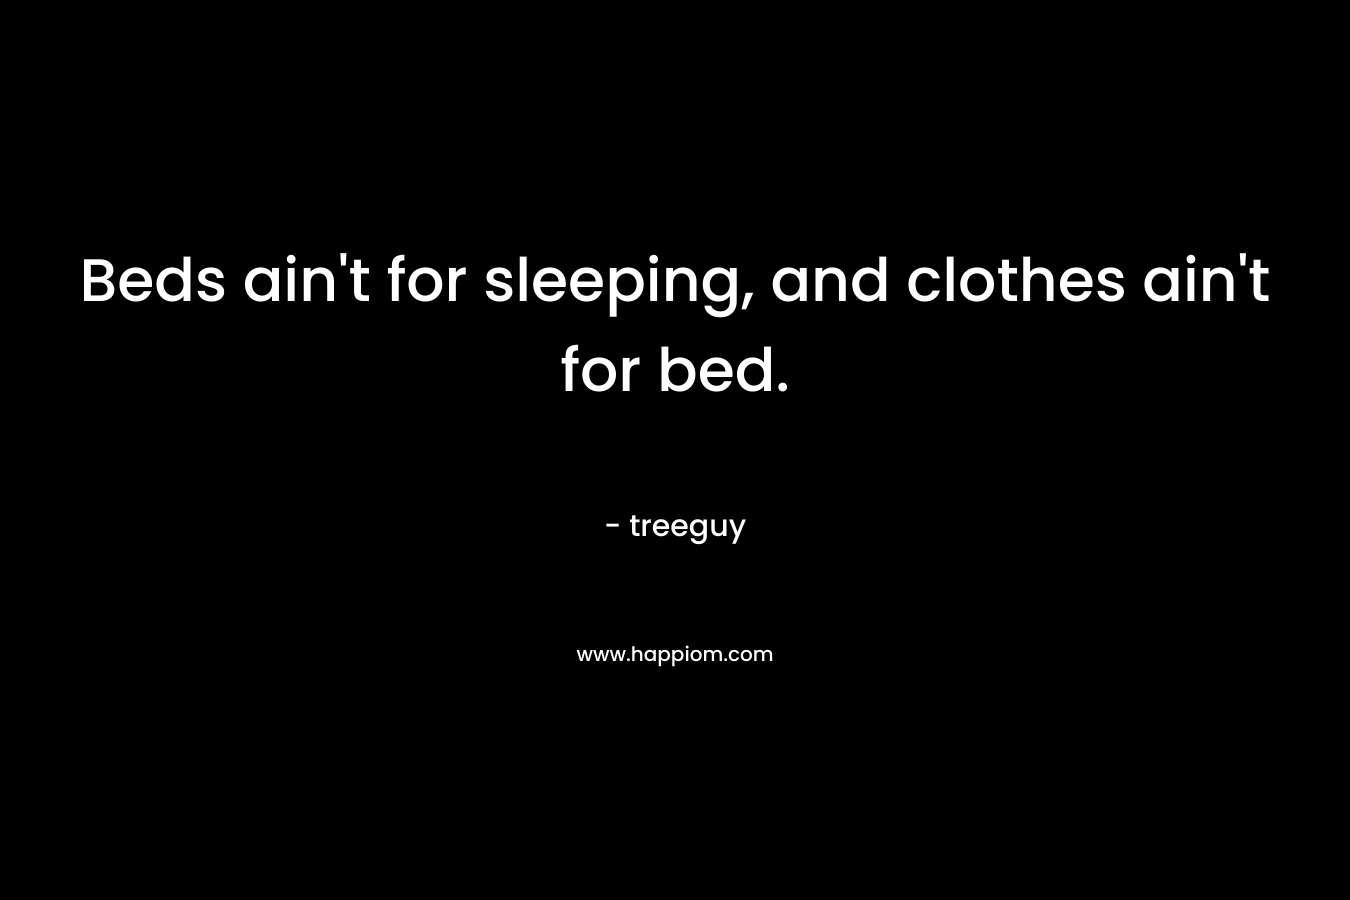 Beds ain’t for sleeping, and clothes ain’t for bed. – treeguy